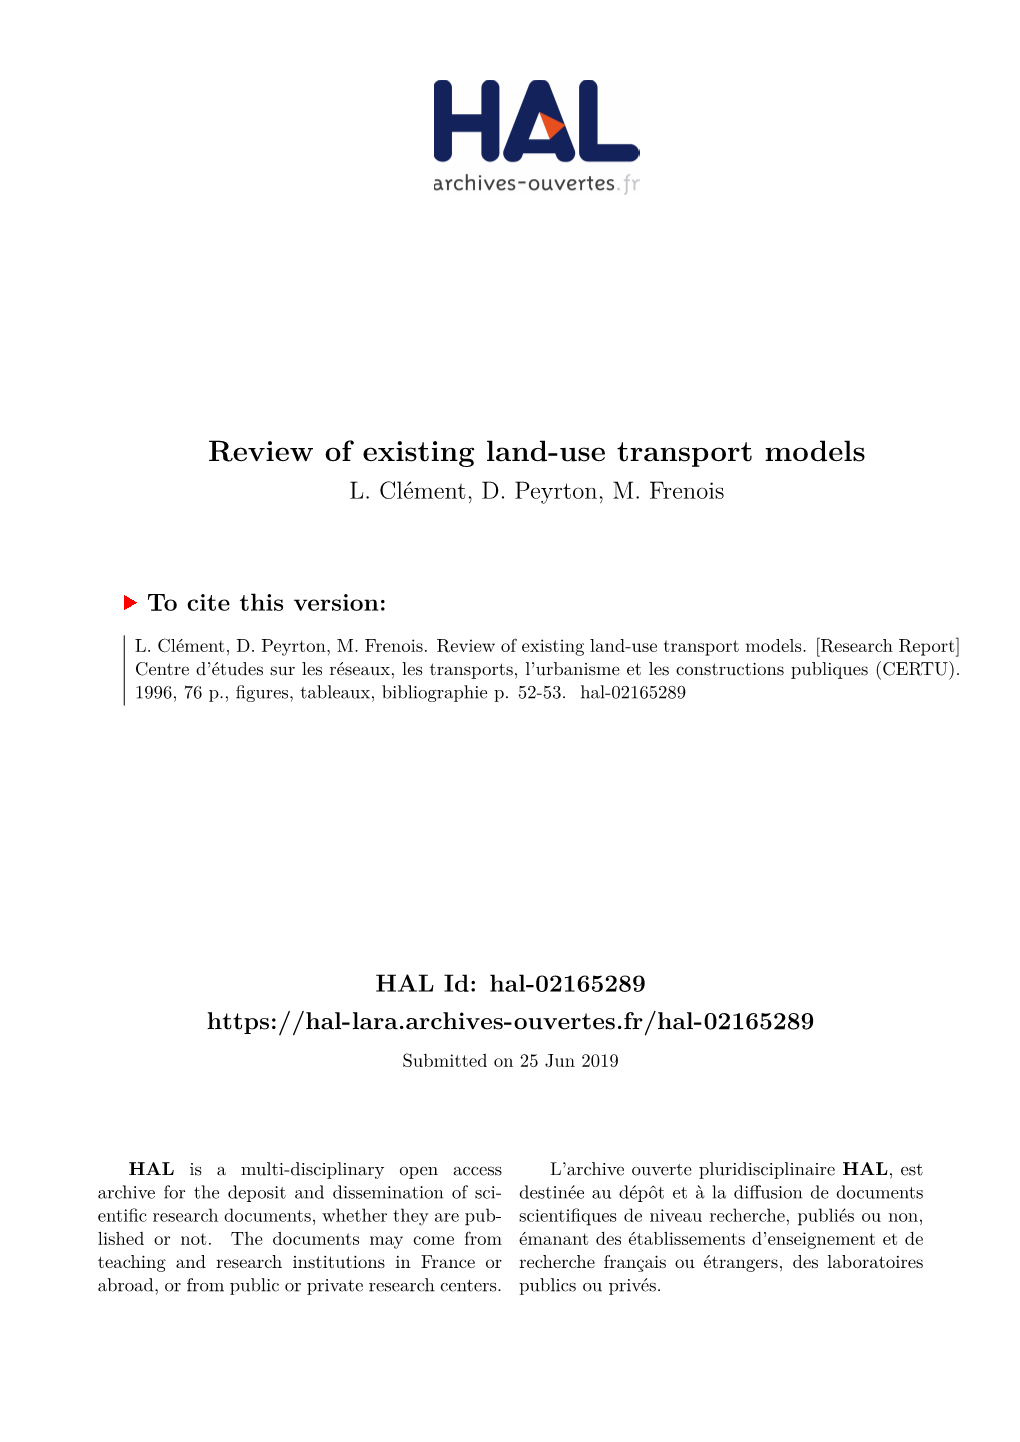 Review of Existing Land-Use Transport Models L